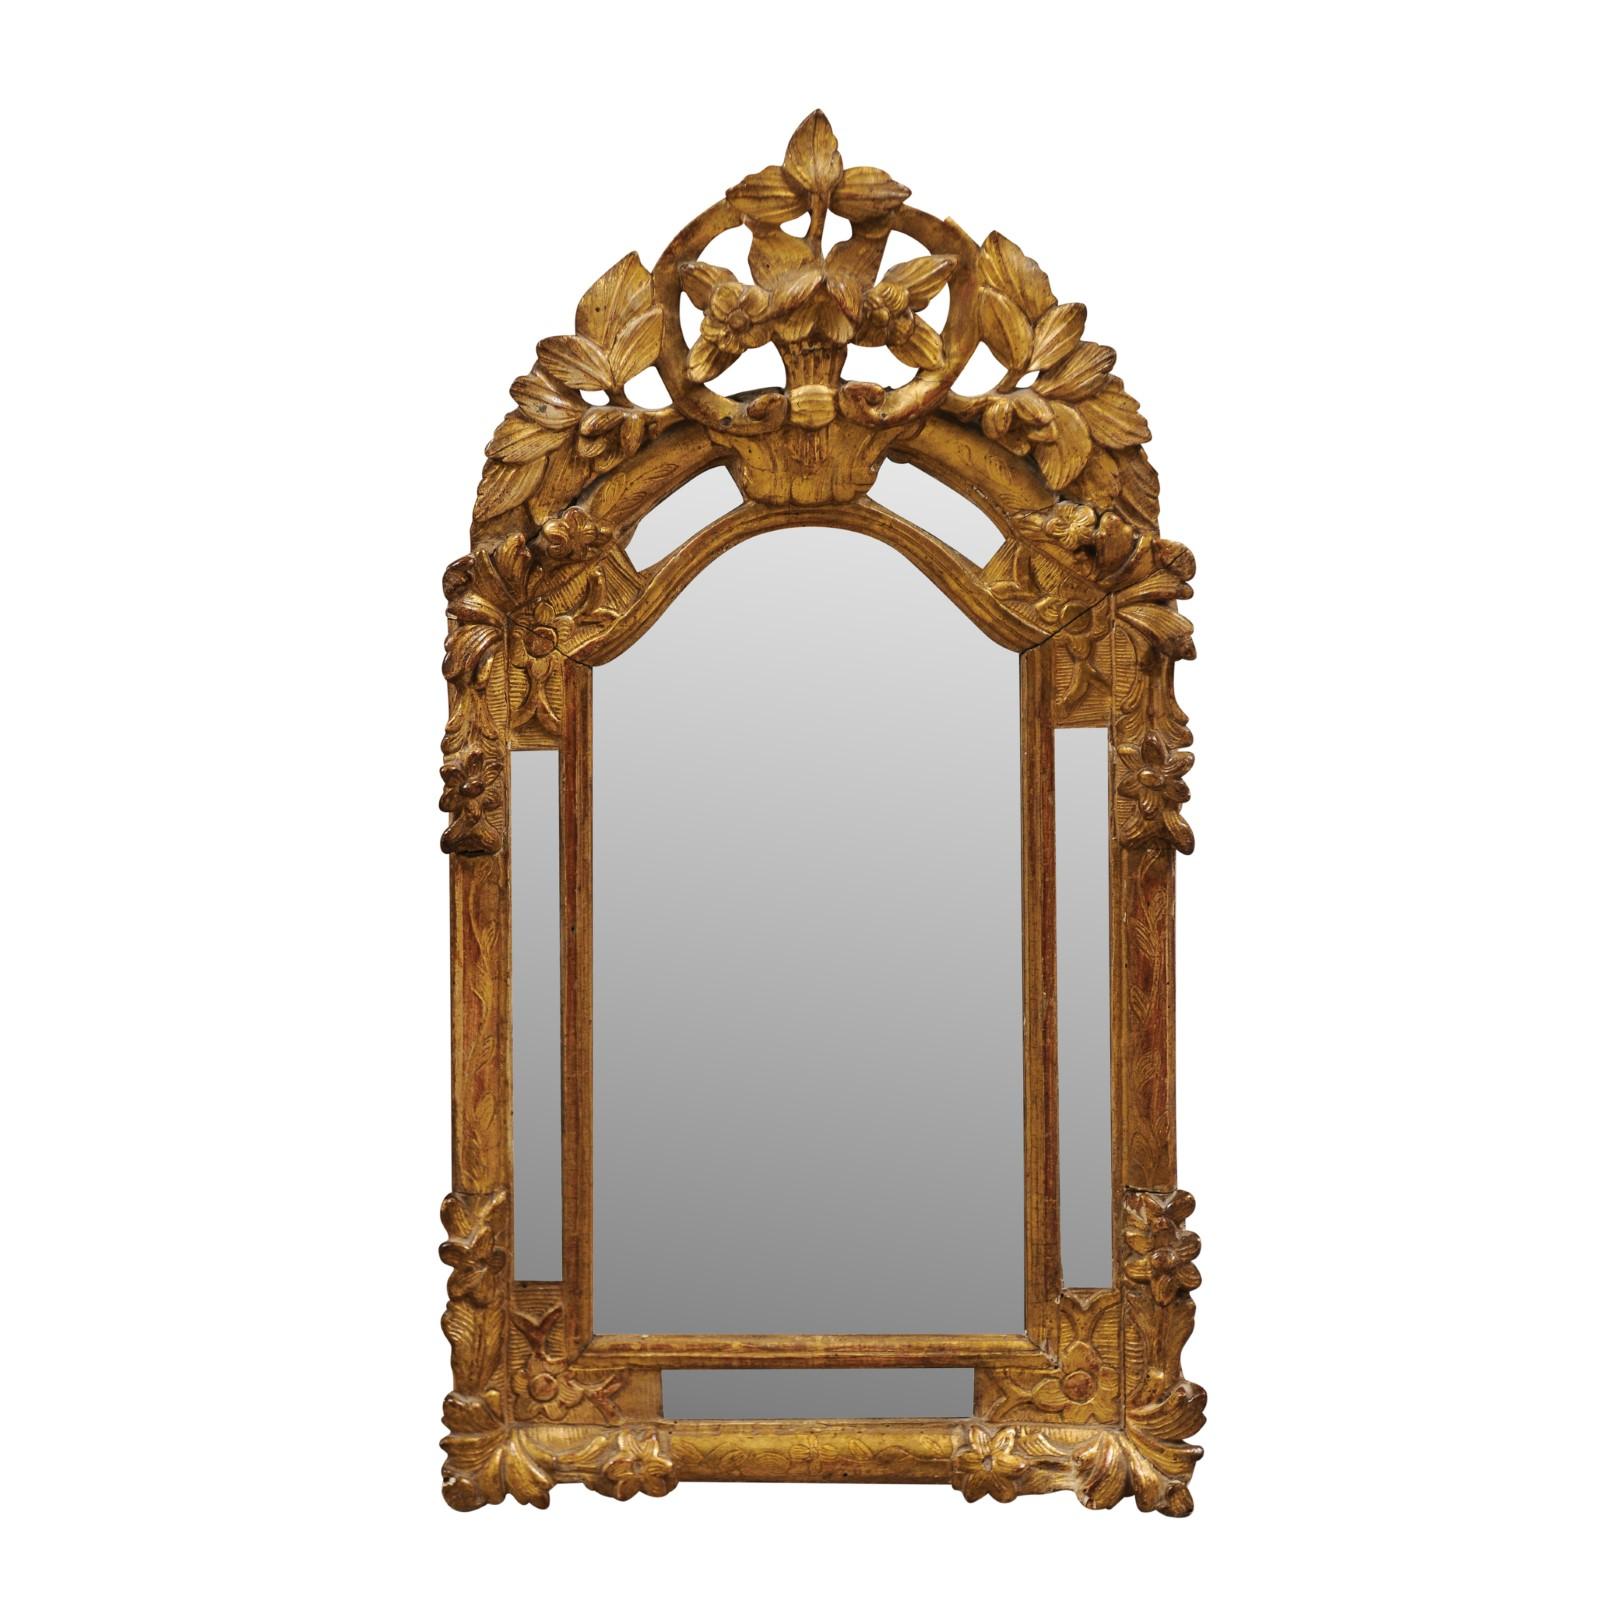 Petite English Regency Hand Carved Giltwood Parclose Mirror with Mercury Glass